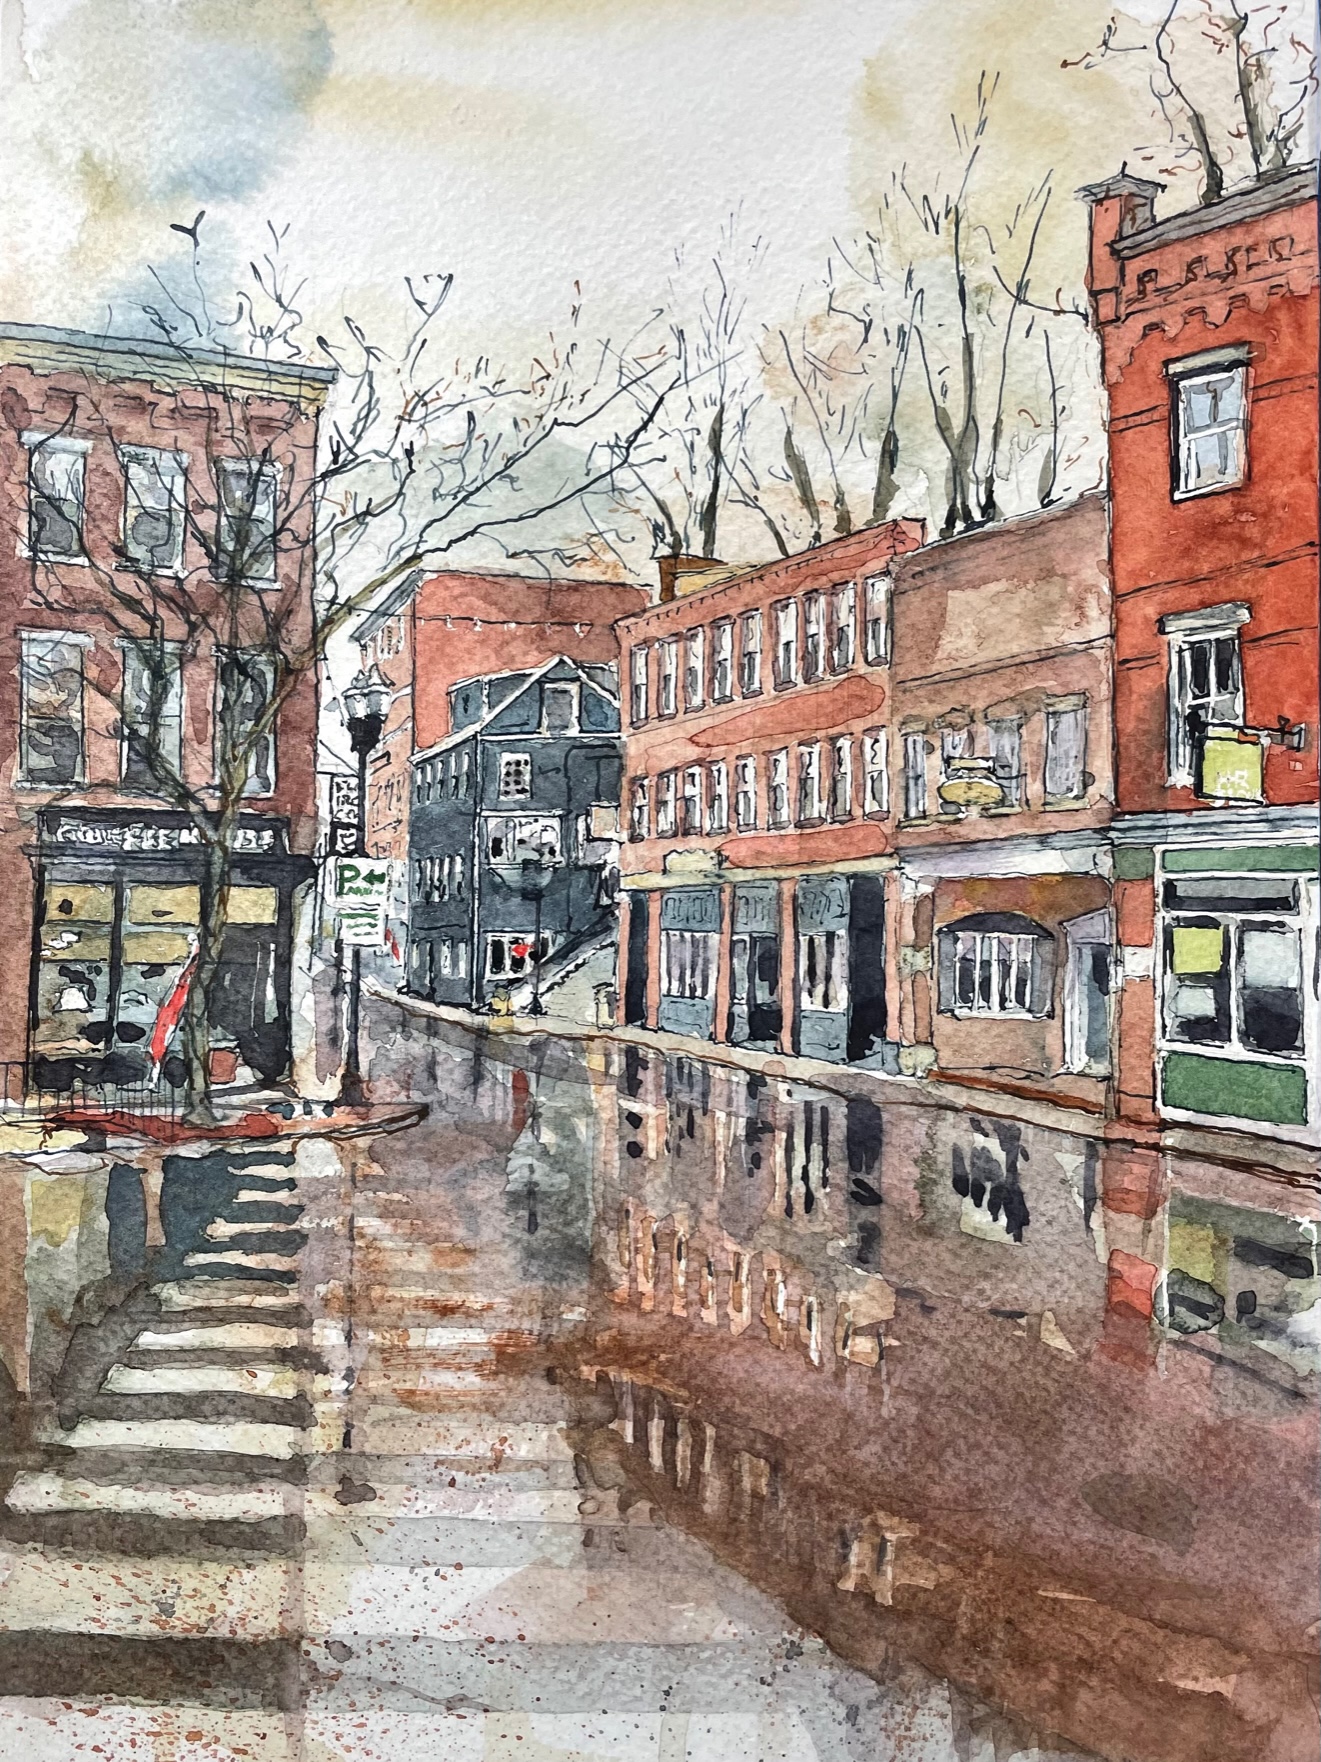 Bellows Falls “After the morning Shower”9x12 on Strathmore